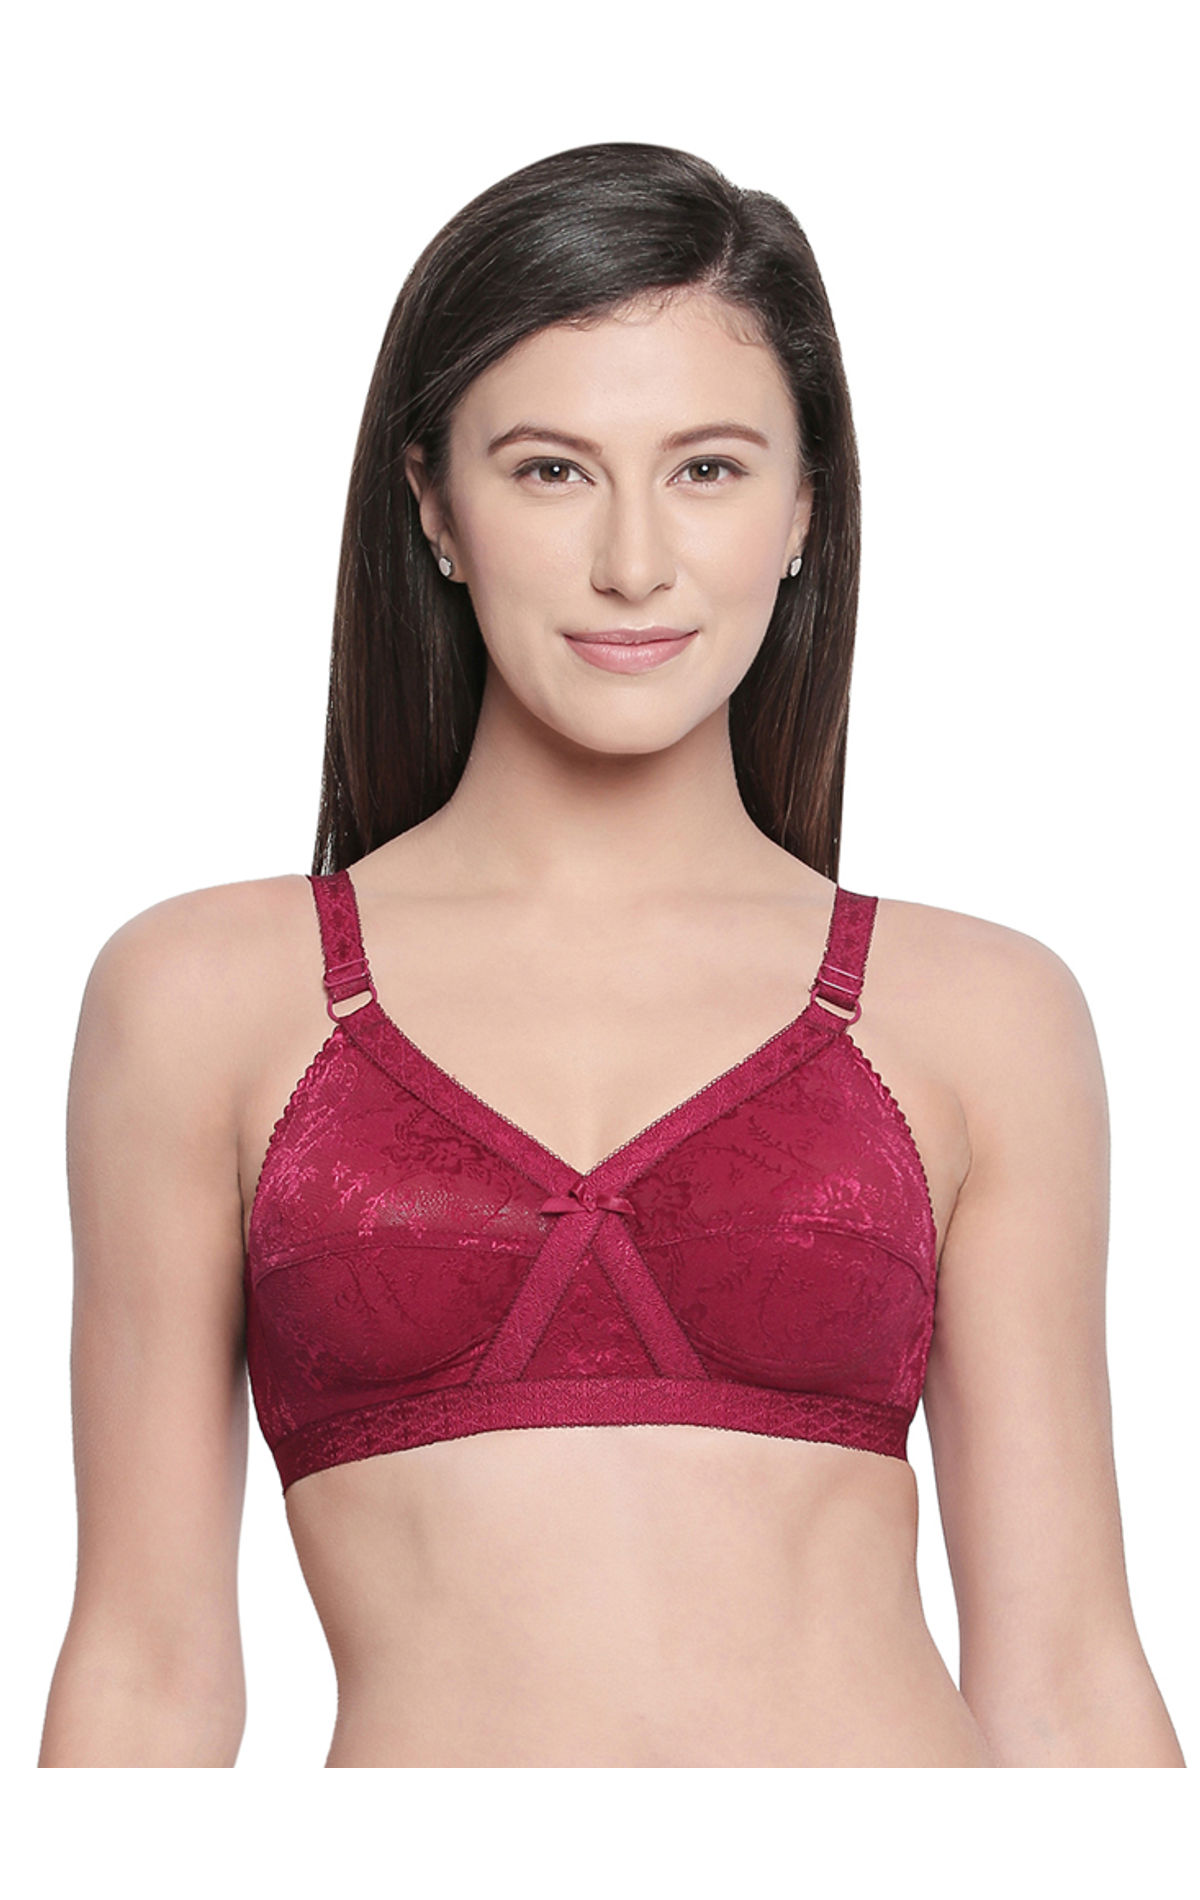 Bodycare 44d Size Bras - Get Best Price from Manufacturers & Suppliers in  India